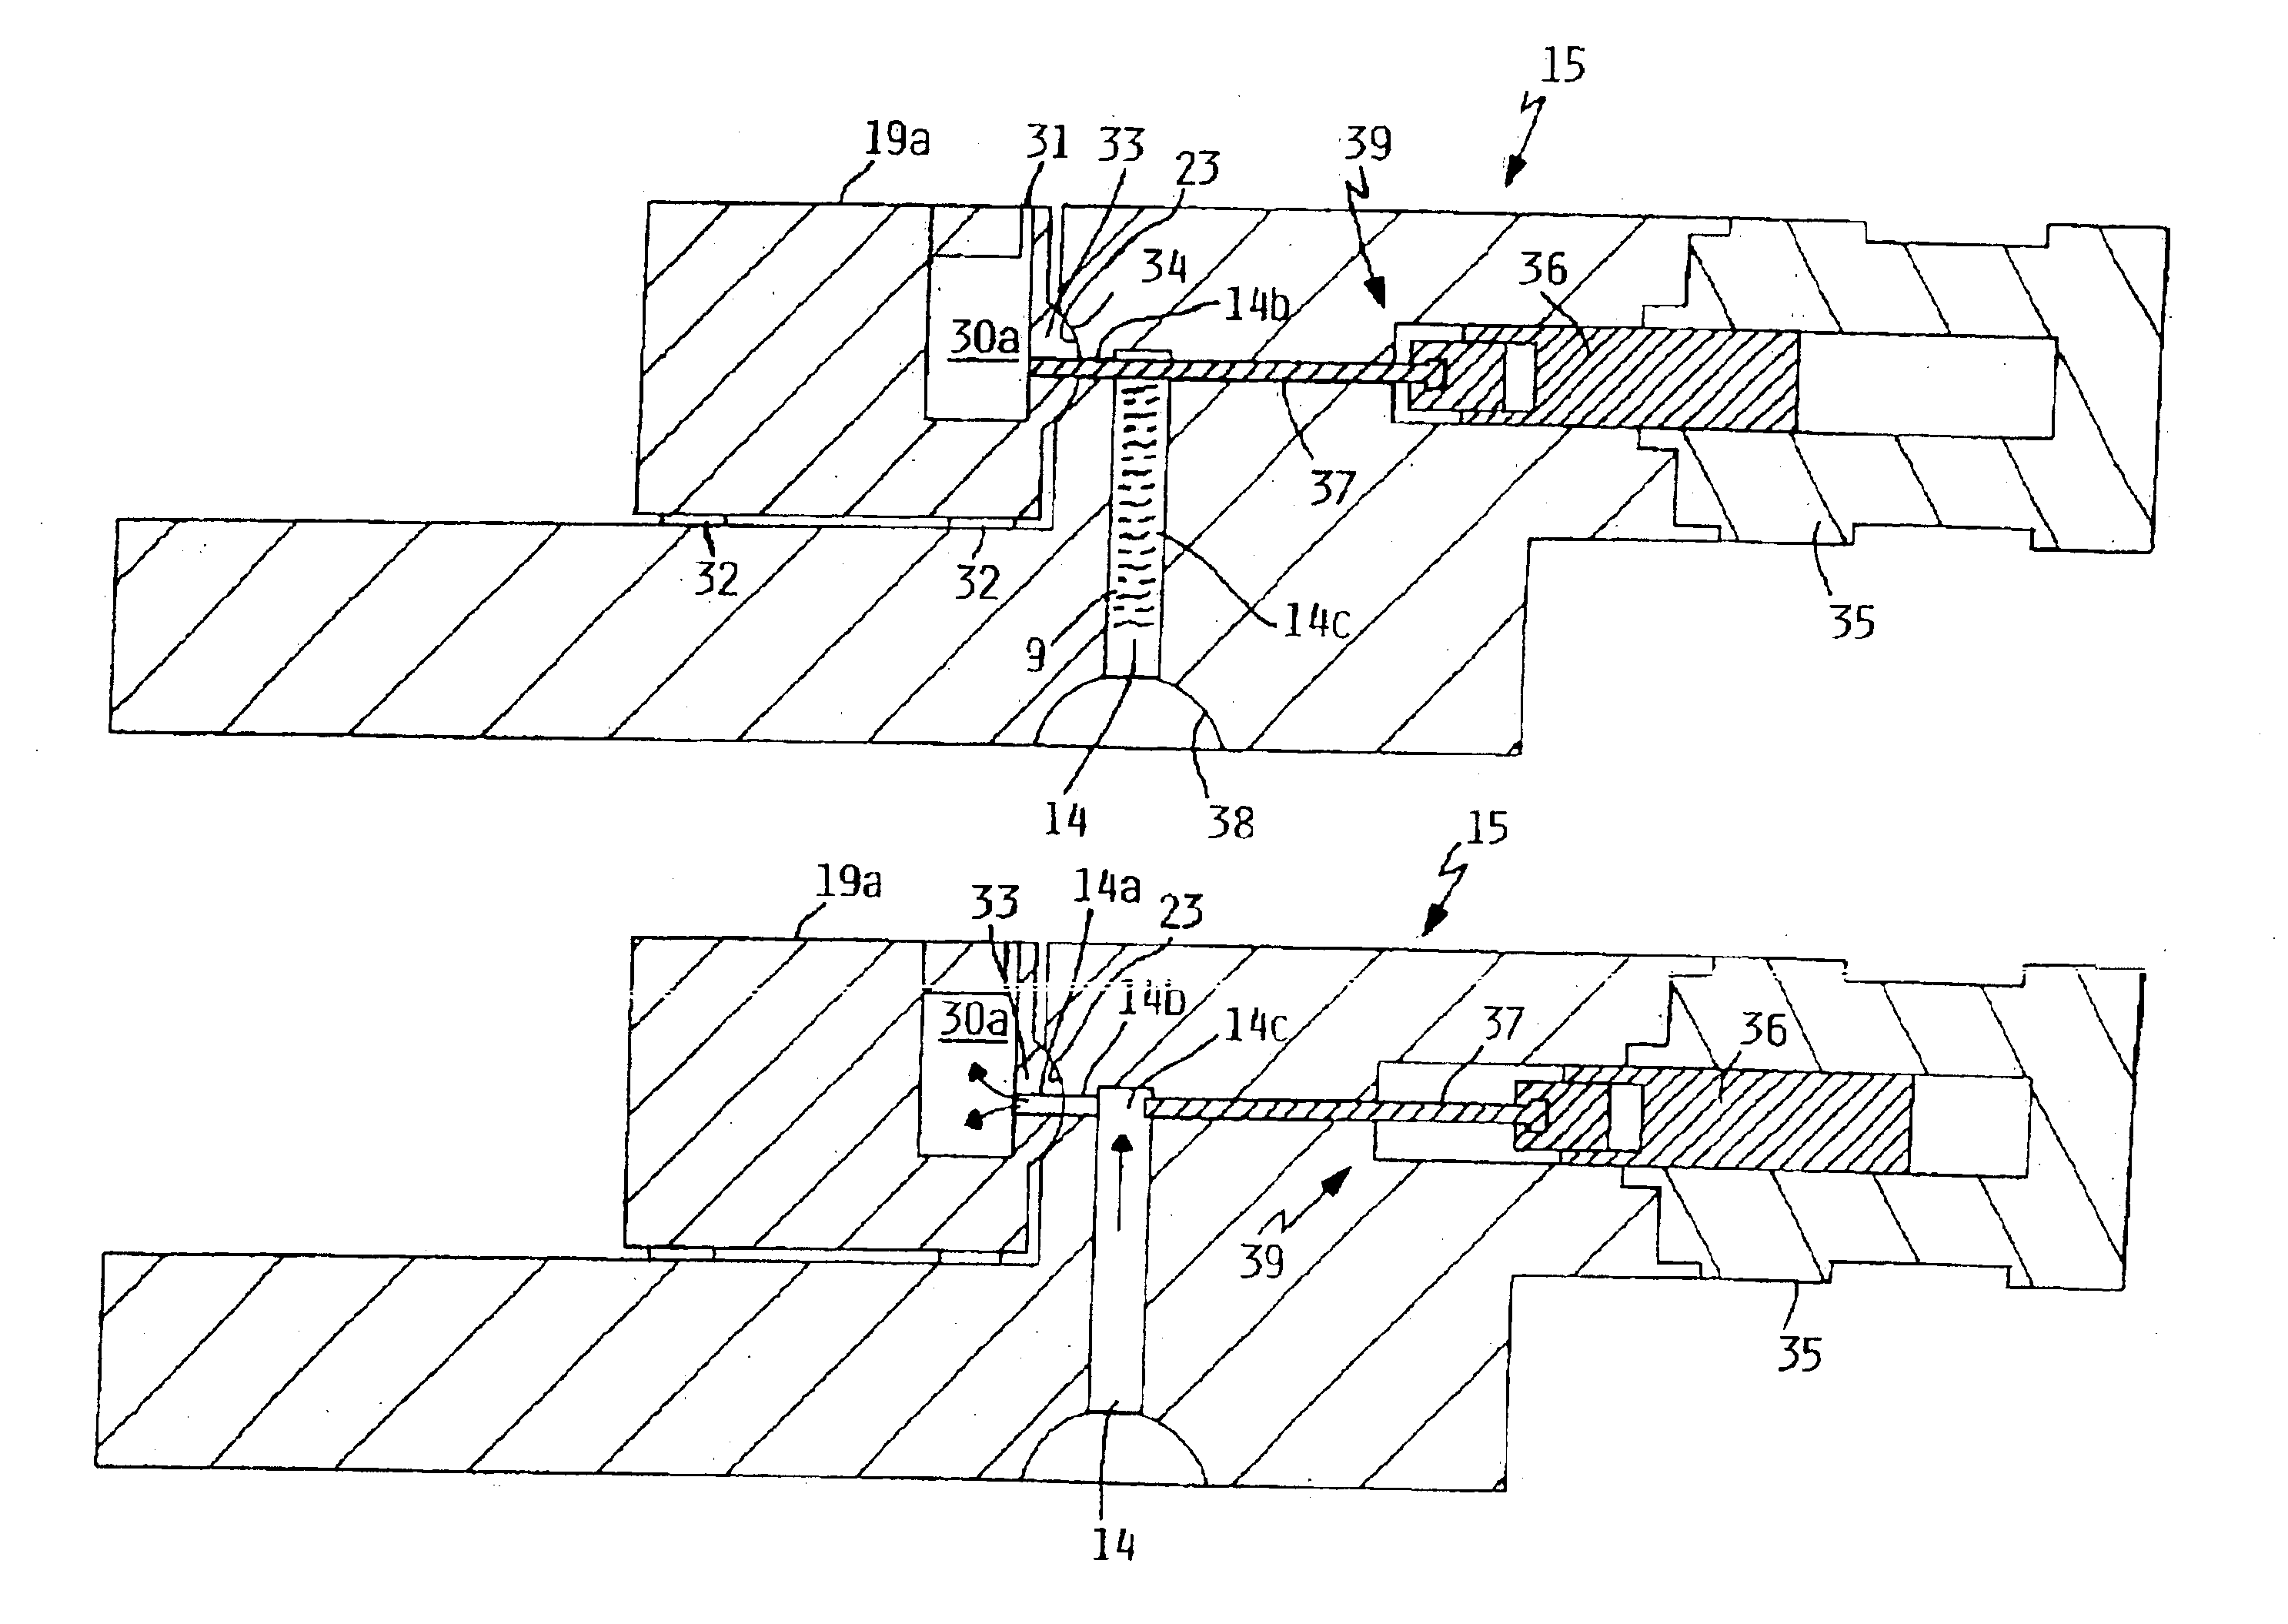 Apparatus and method of forming parts